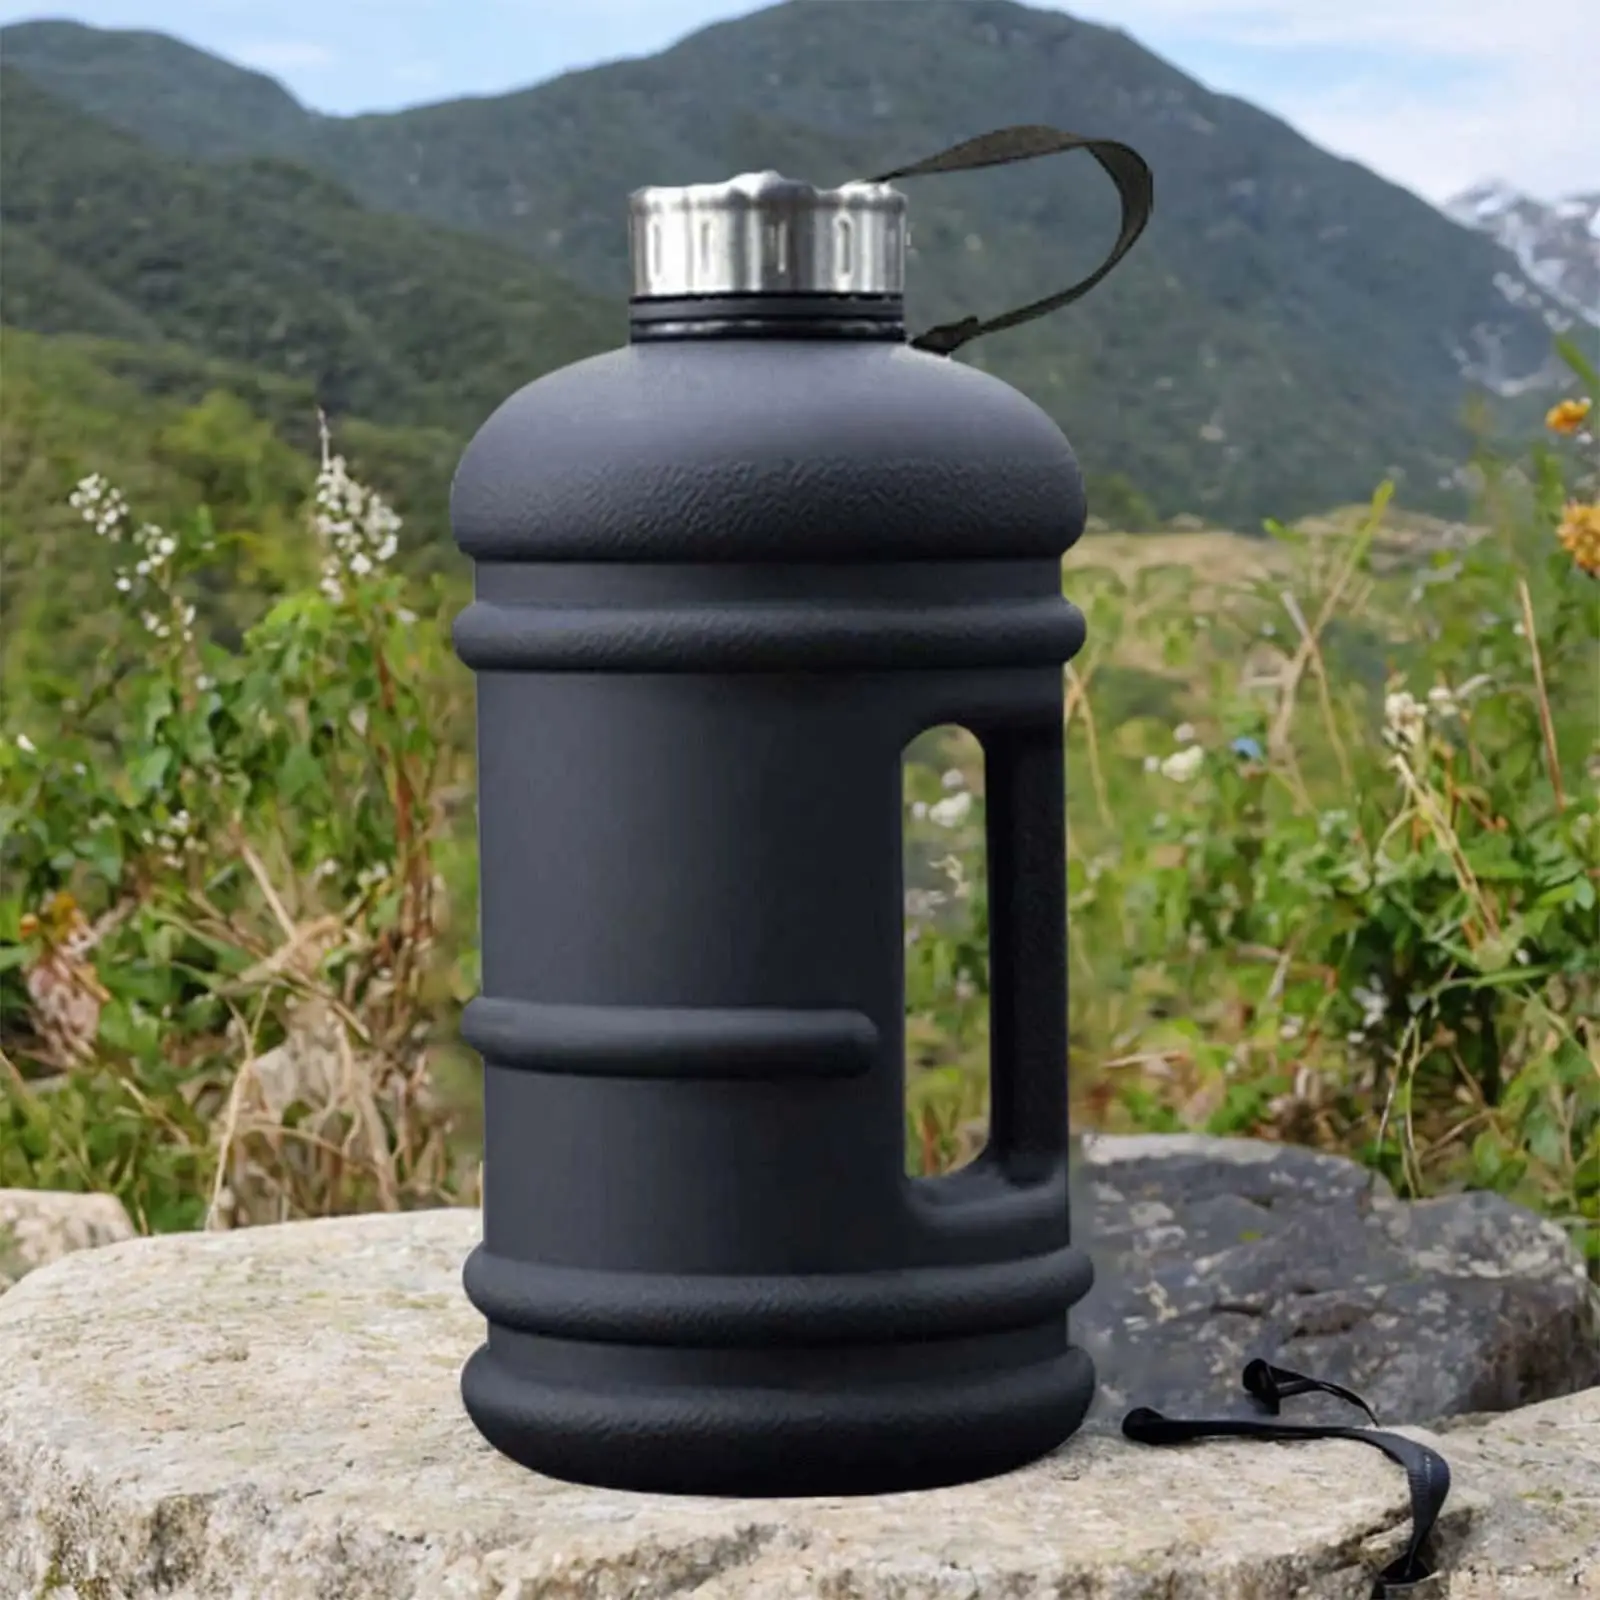 Water Bottle Handle Juice Containers 2.2L Large Capacity Leakproof Drinking Bottles for Camping Sports Outdoors Fitness Hiking